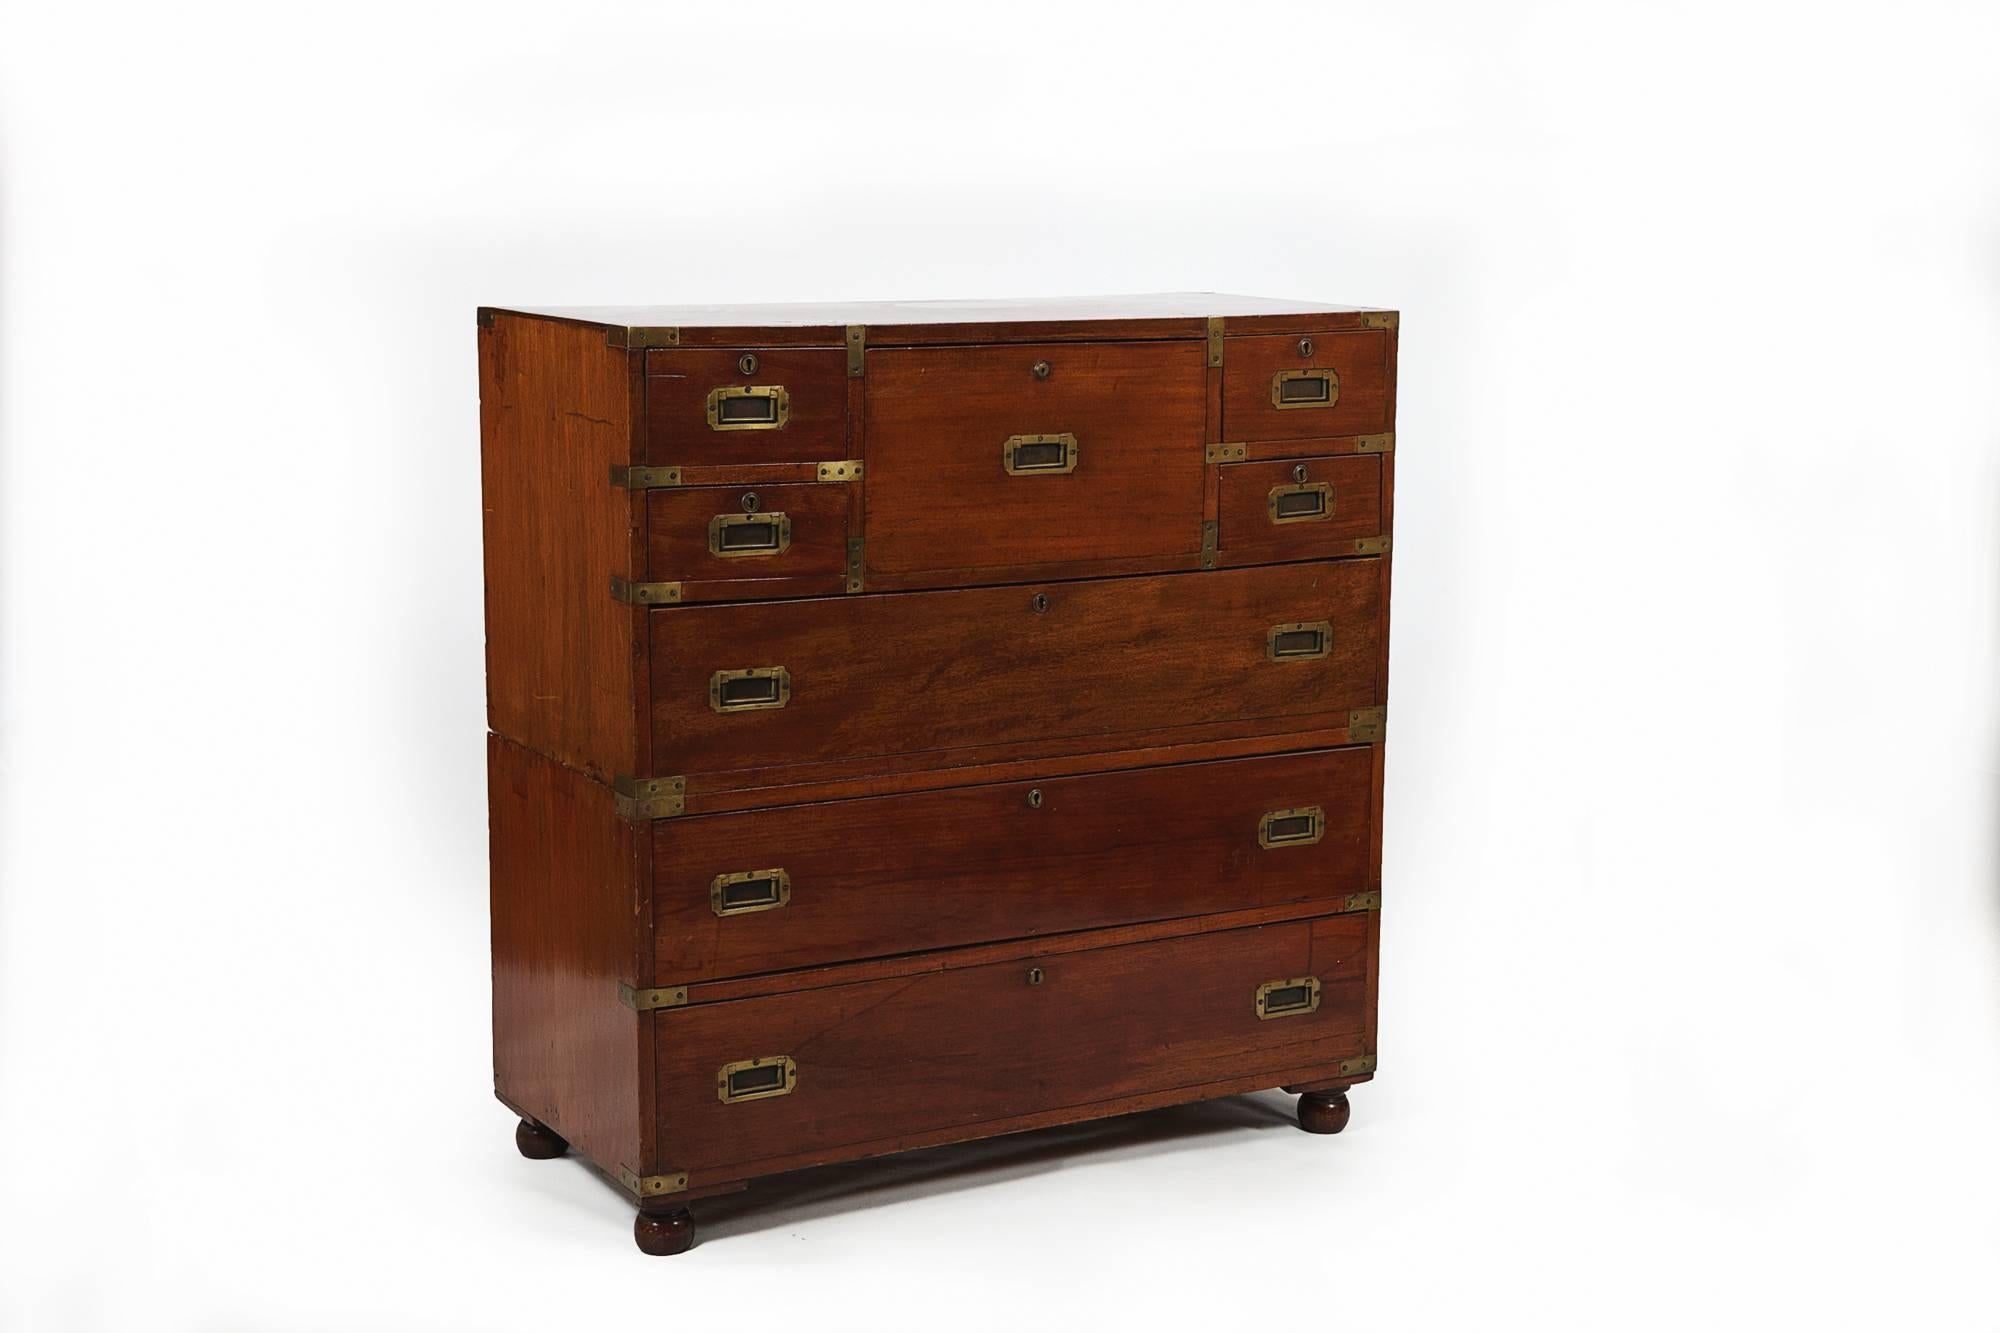 19th Century mahogany military campaign chest with miniature fall front secretaire opening to reveal fitted compartments of scriver and pigeonholes flanked with four small drawers raised over three long drawers with brass pulls terminating on bun